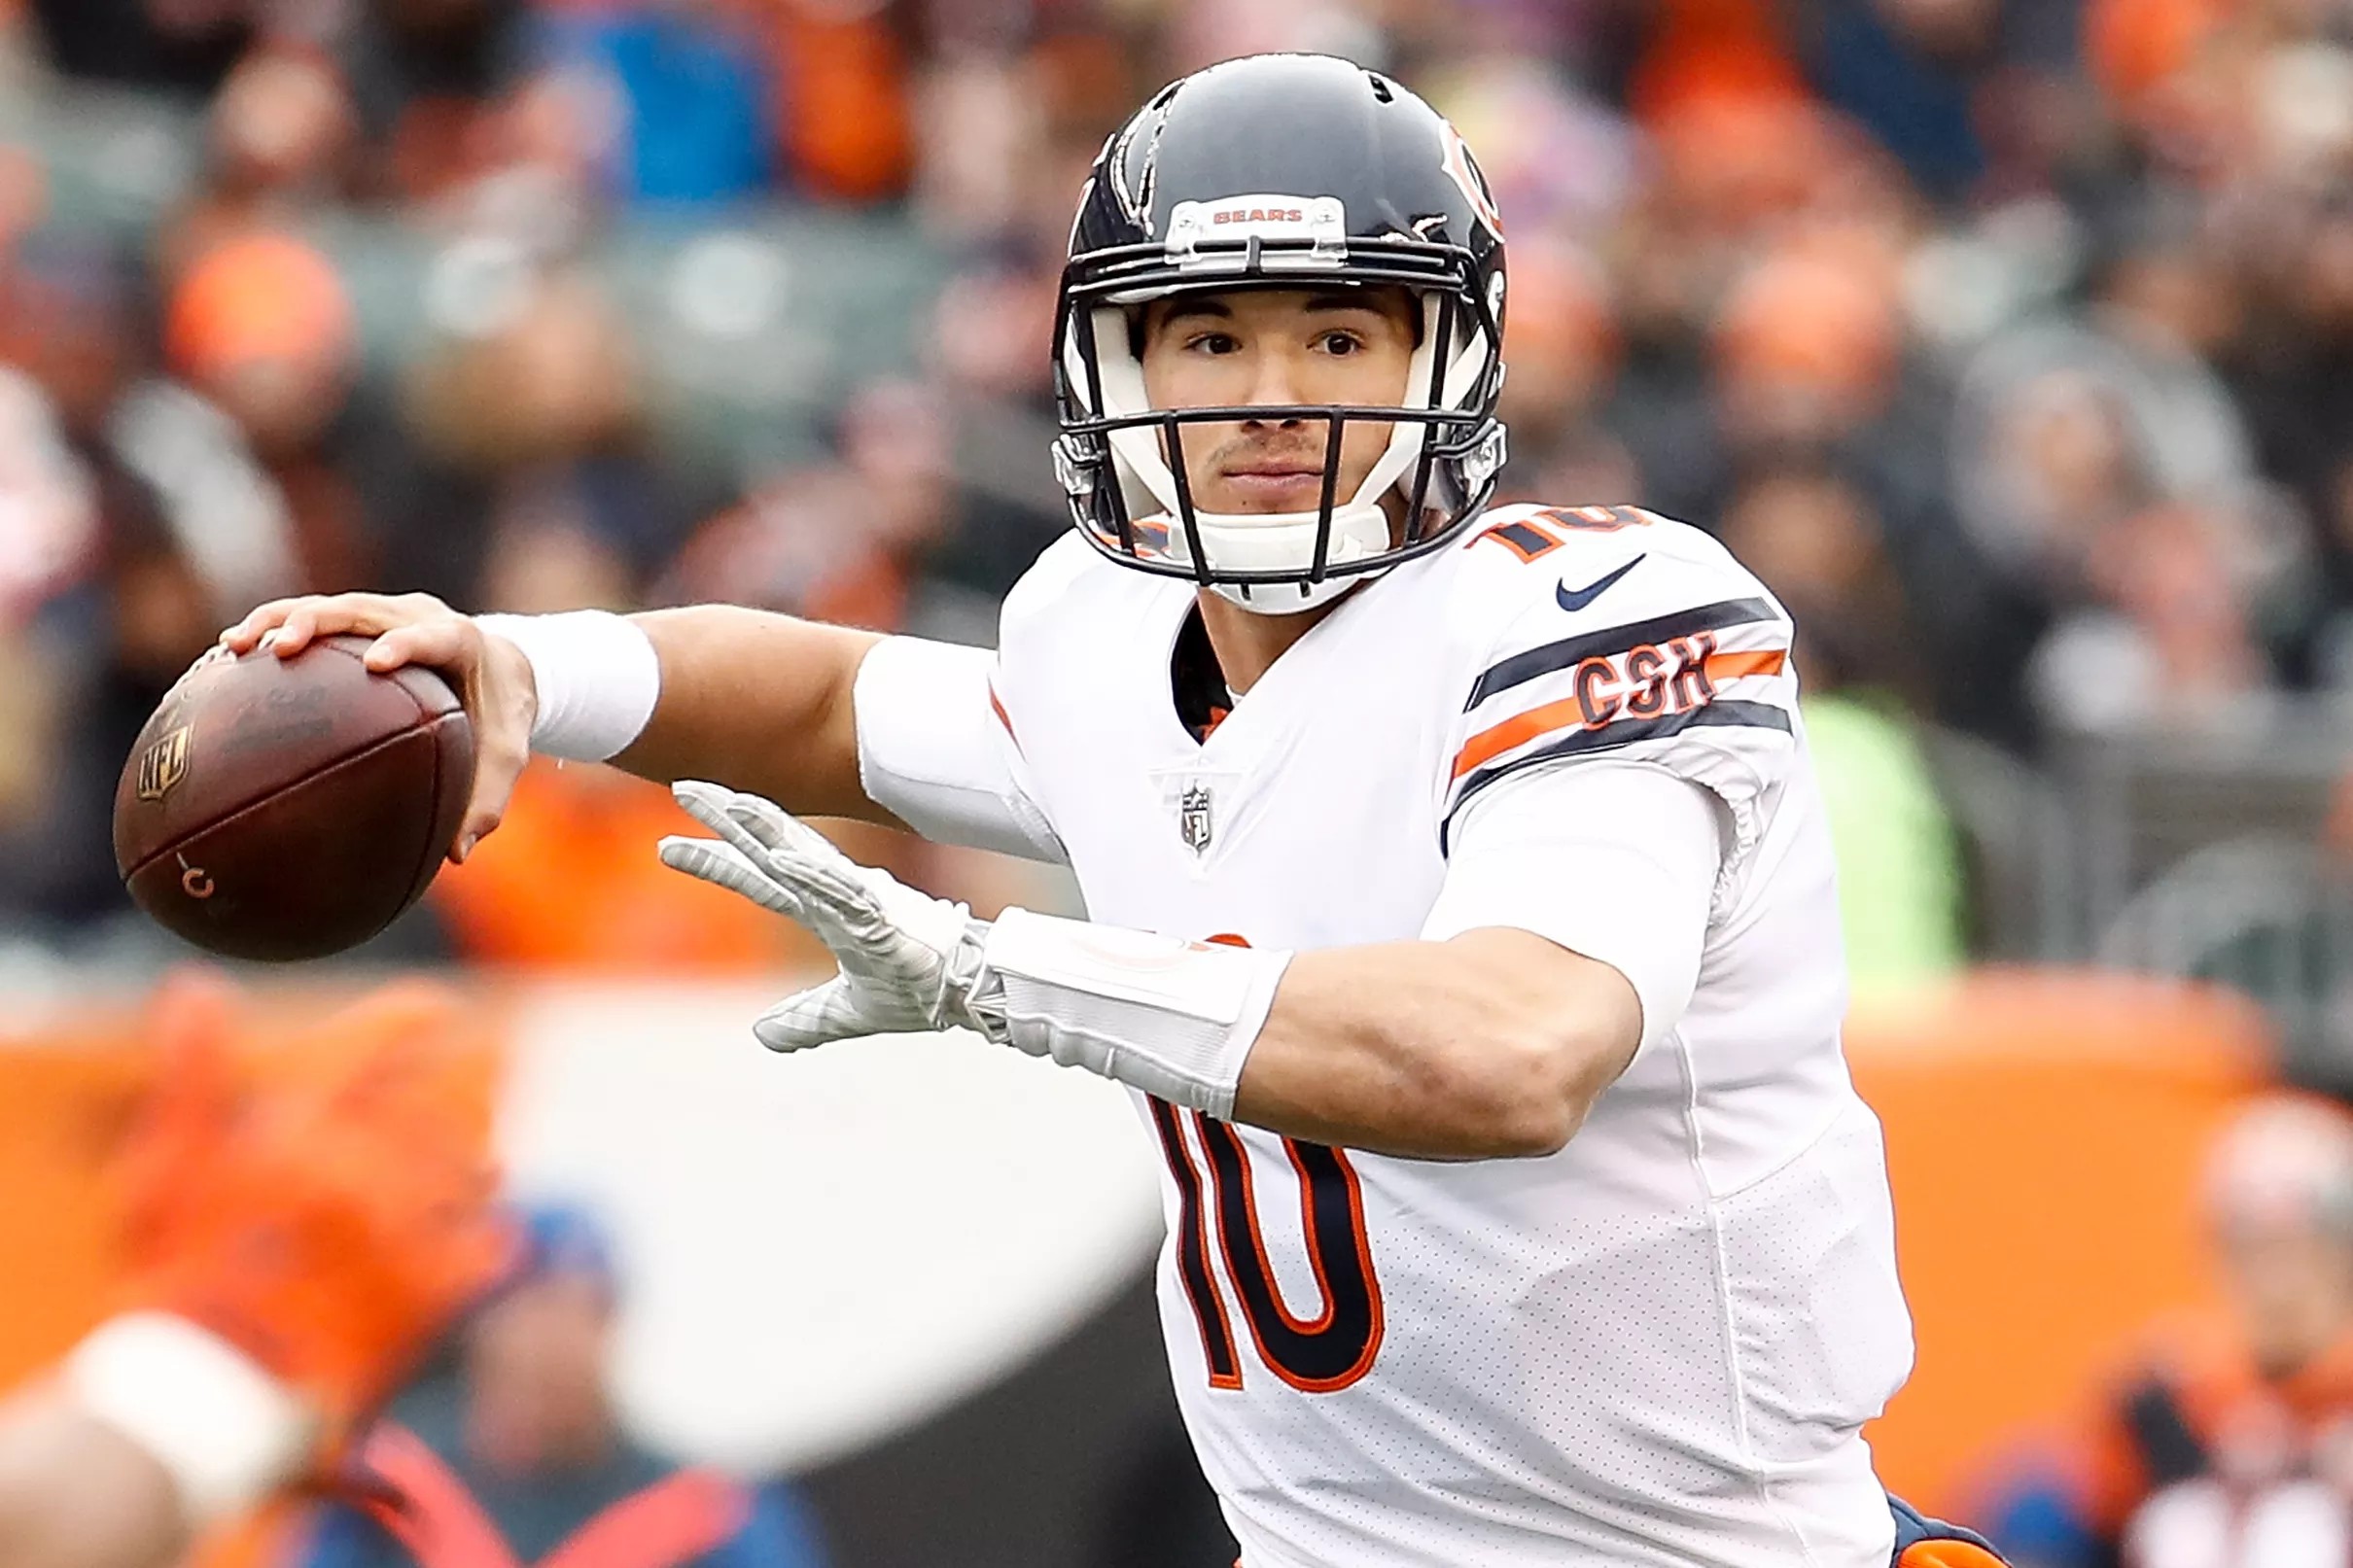 Mitchell Trubisky is the Best rookie quarterback in Chicago Bears history